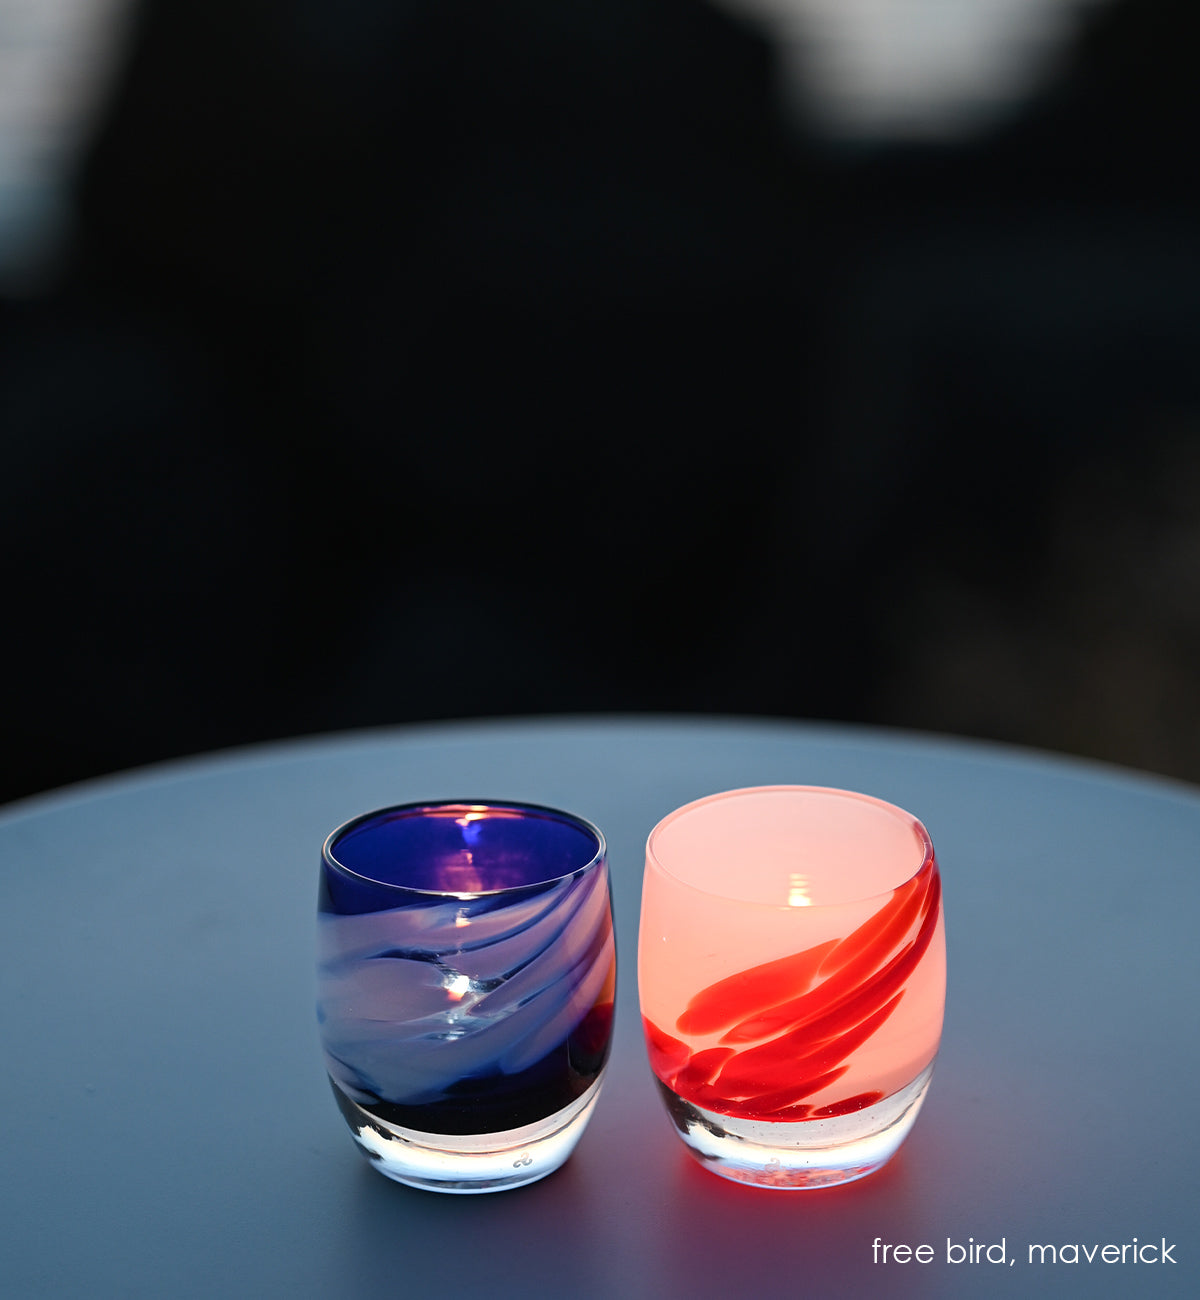 freebird blue with white wing, maverick white with red wing, hand-blown glass votive candle holders. 